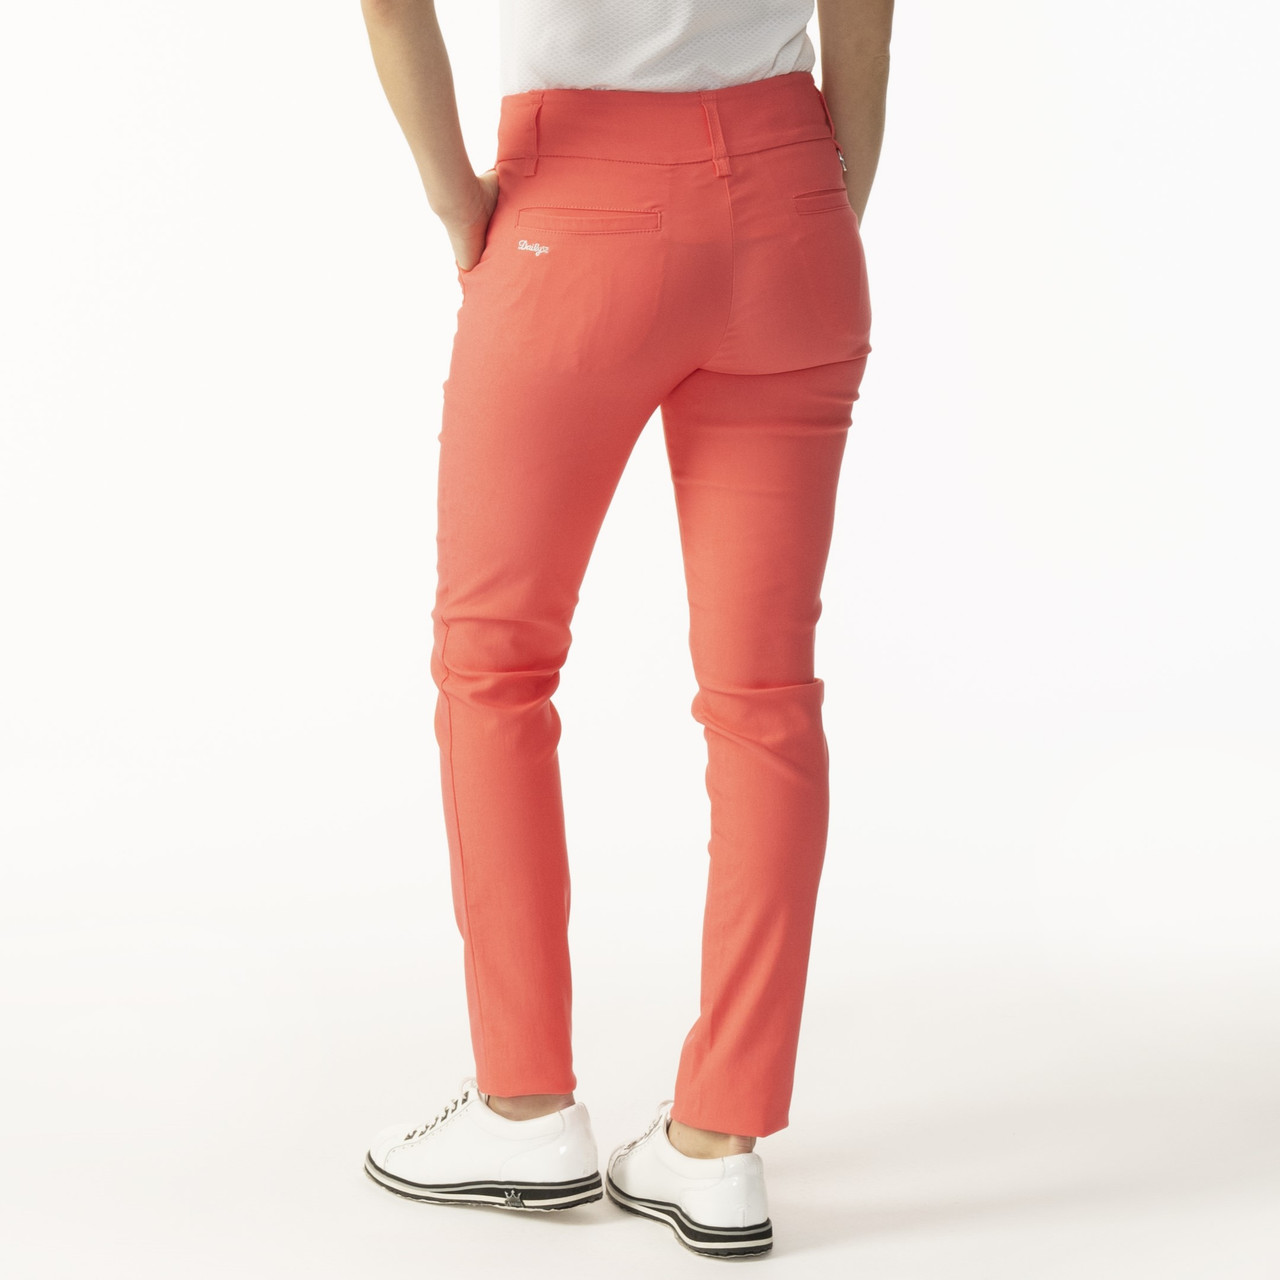 Daily Sports MAGIC PANTS 29 INCH 7/8 pants in coral buy online